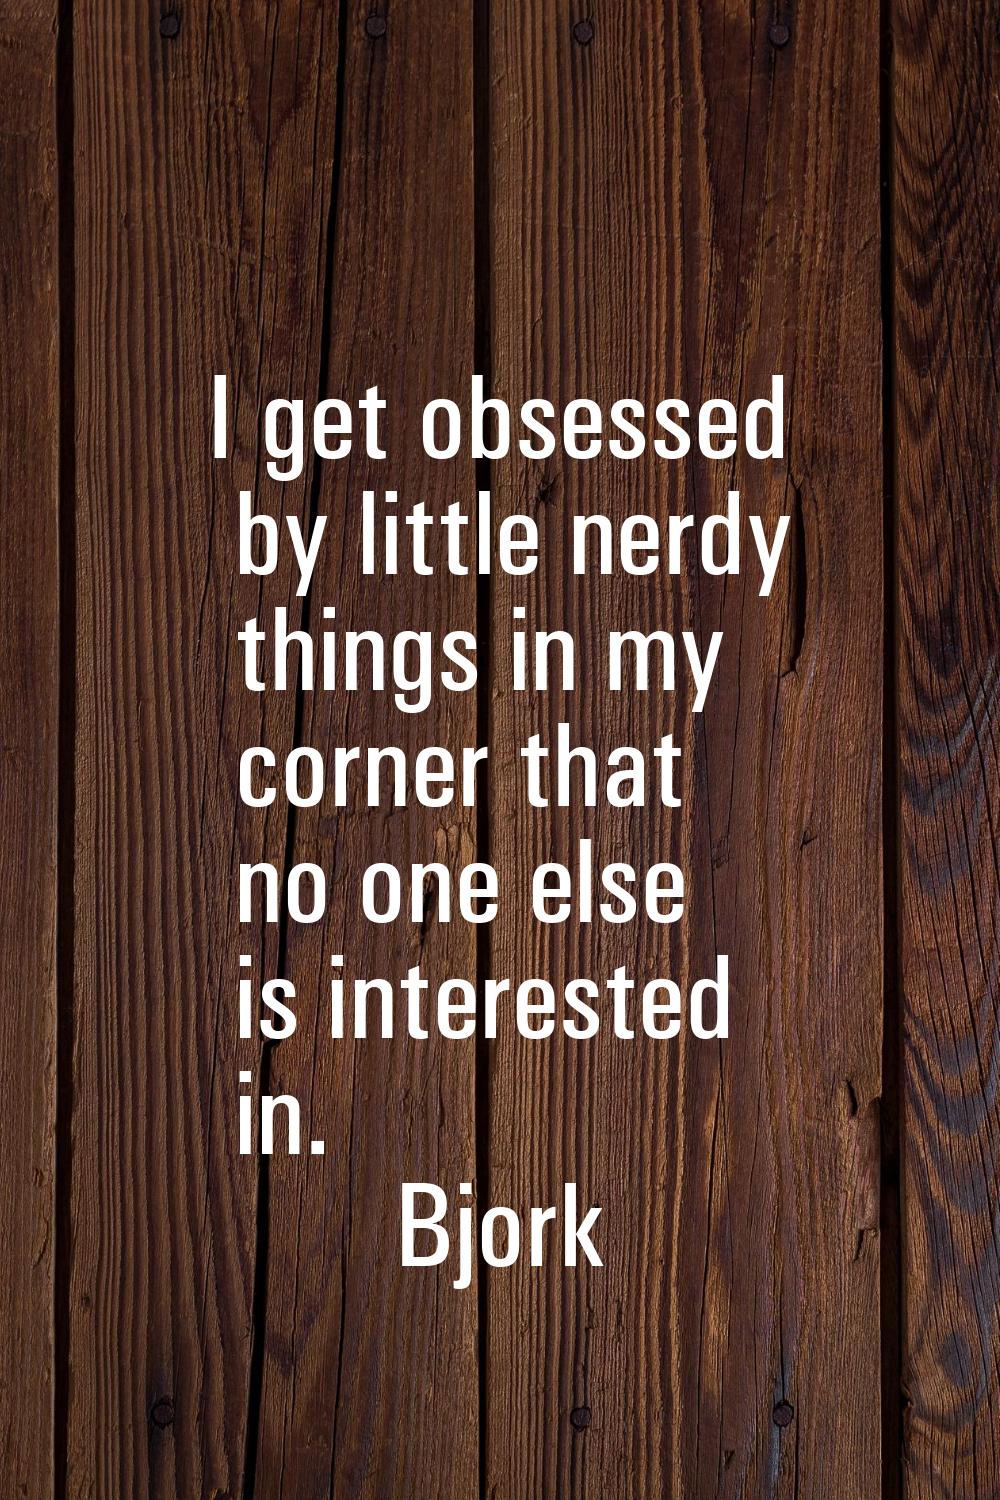 I get obsessed by little nerdy things in my corner that no one else is interested in.